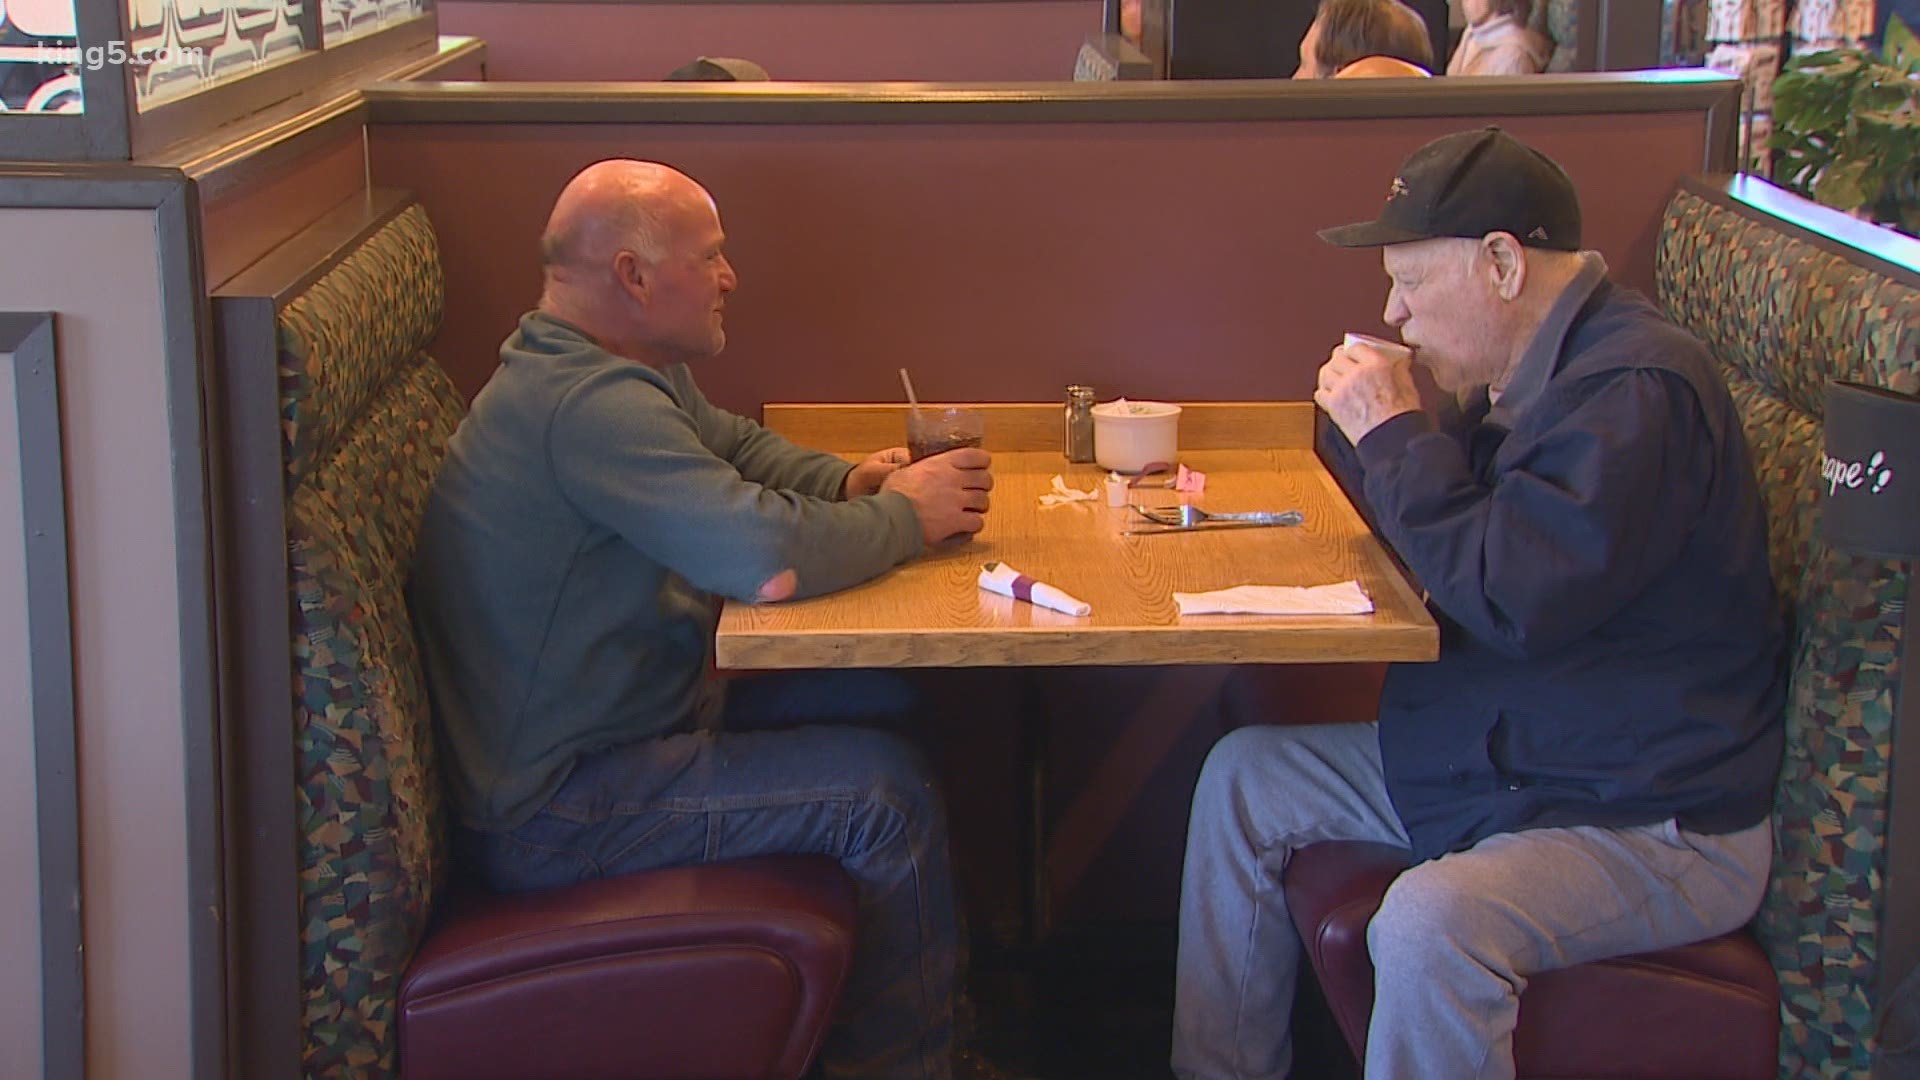 One restaurant owner said he was protesting Washington Gov. Jay Inslee's restrictions on indoor dining. Another said his decision was strictly business.